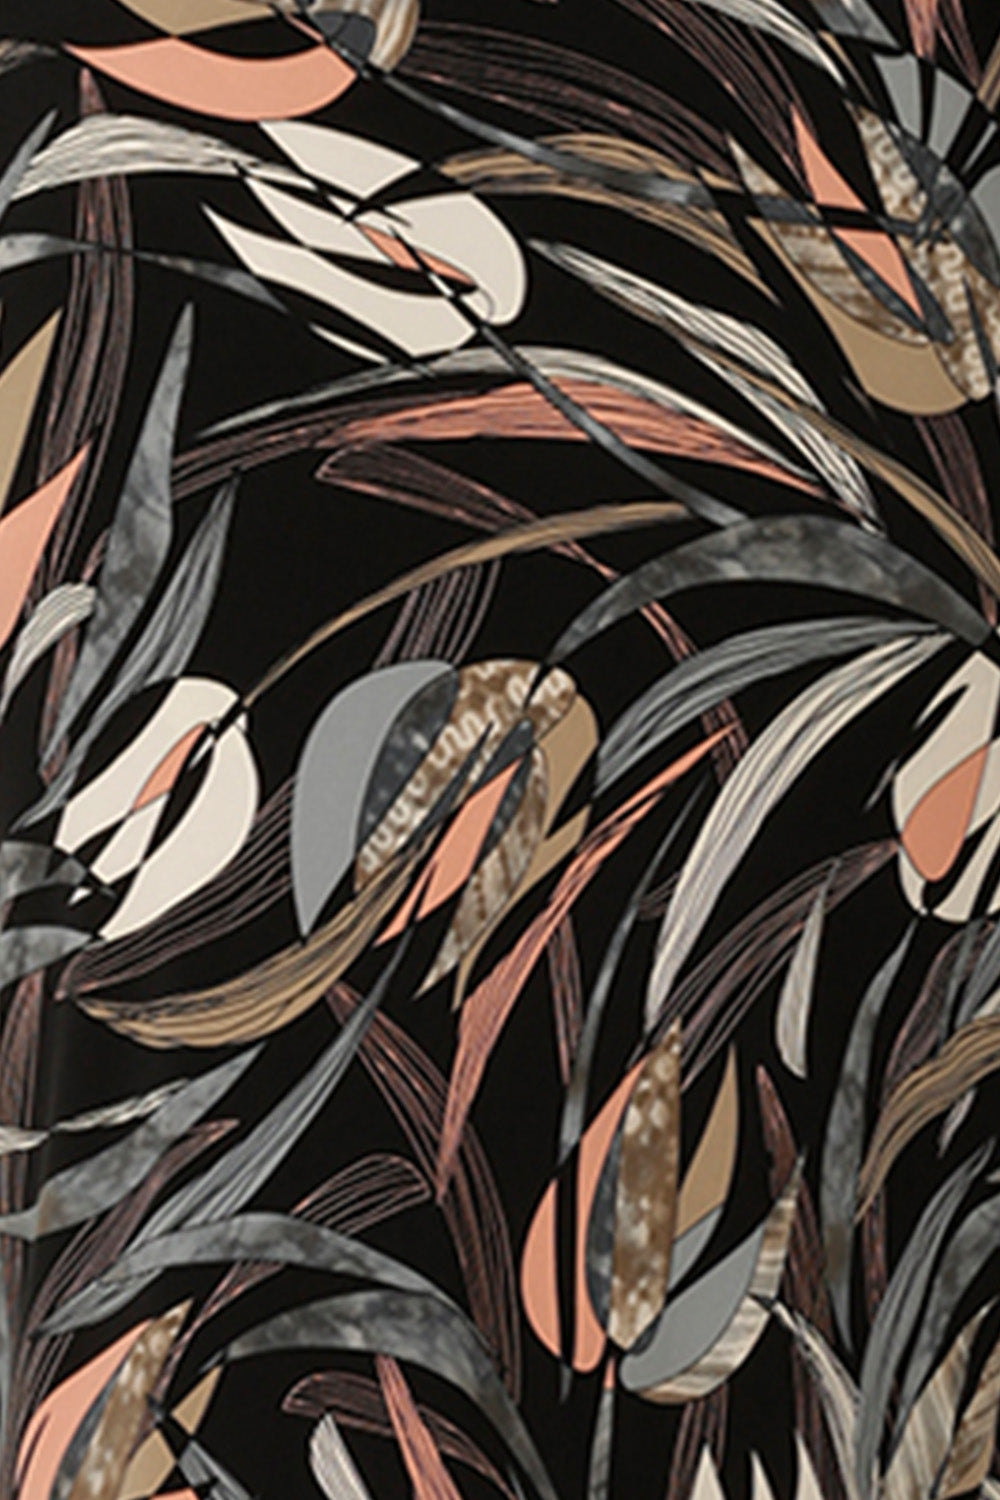 Dry Touch jersey fabric in 'Nouveau' floral print used by Australian and New Zealand women's clothing label to make a range of women's workwear skirts, dresses and tops.